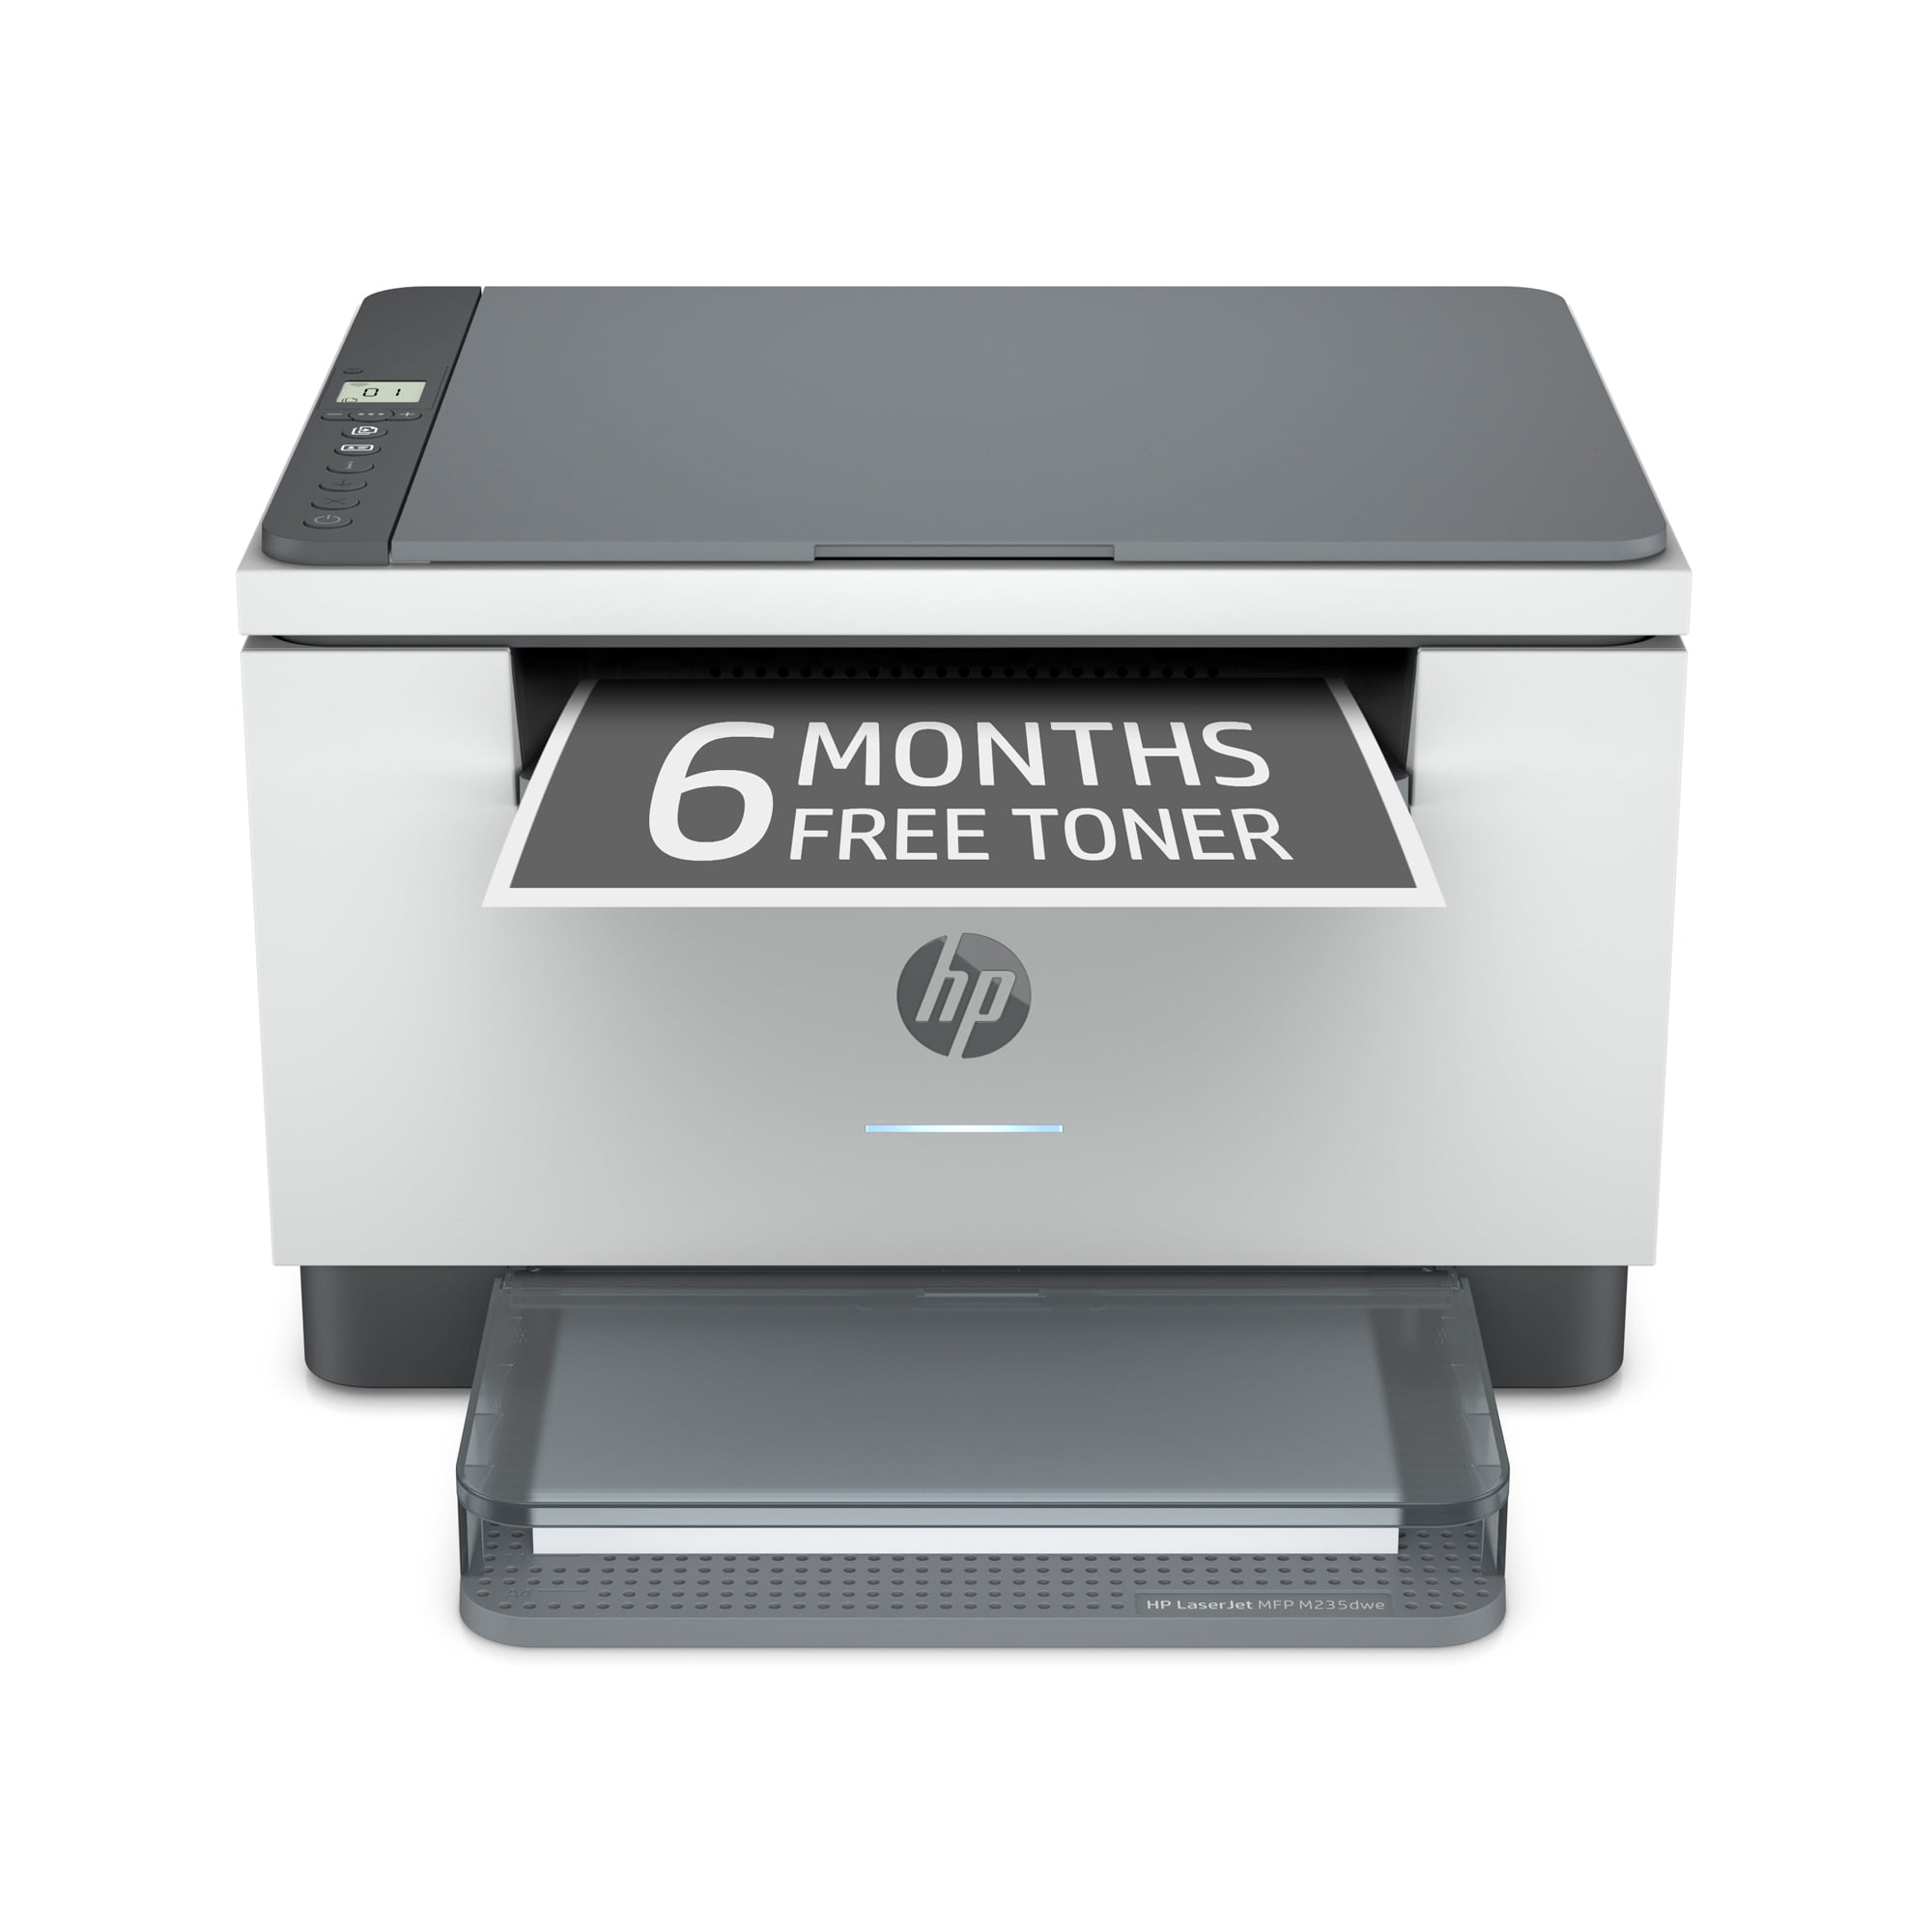 HP LaserJet MFP M235dwe Wireless Black & White Laser Printer with 6 Months Instant Ink Included with HP+